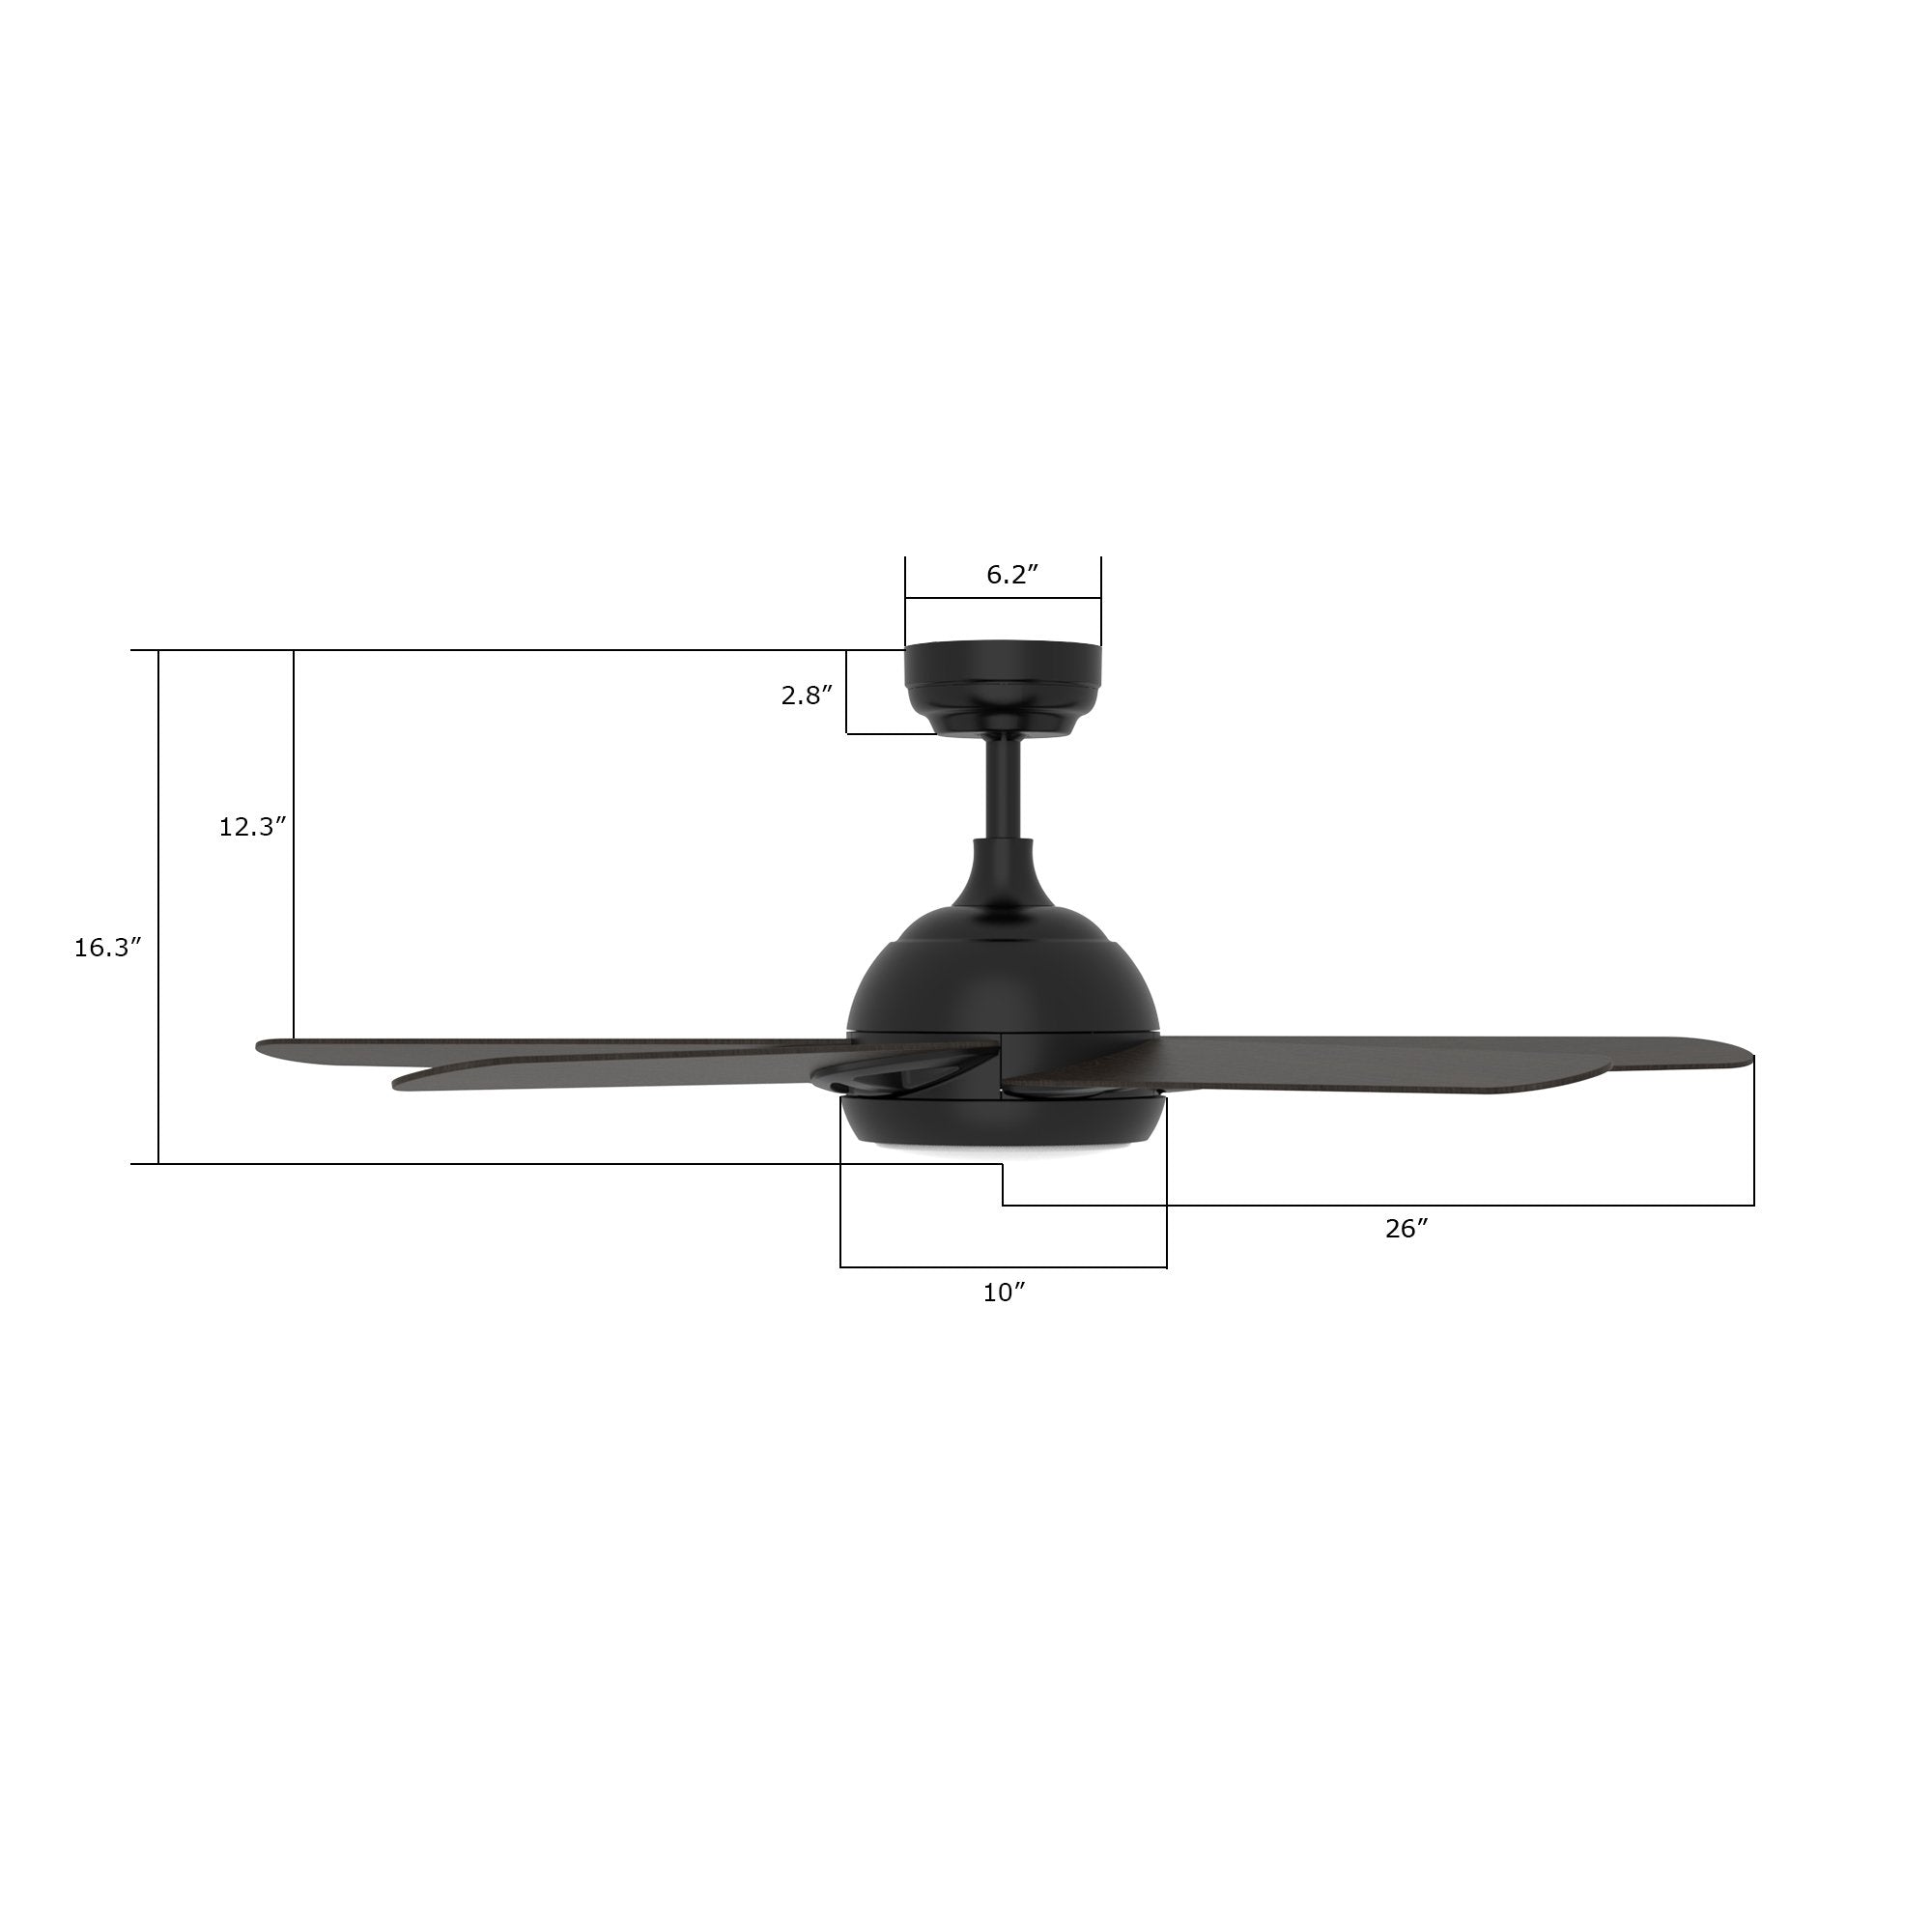 Sonnen 52'' Best Smart Ceiling Fan with Remote, Light Kit Included, Works with Google Assistant and Amazon Alexa,Siri Shortcut